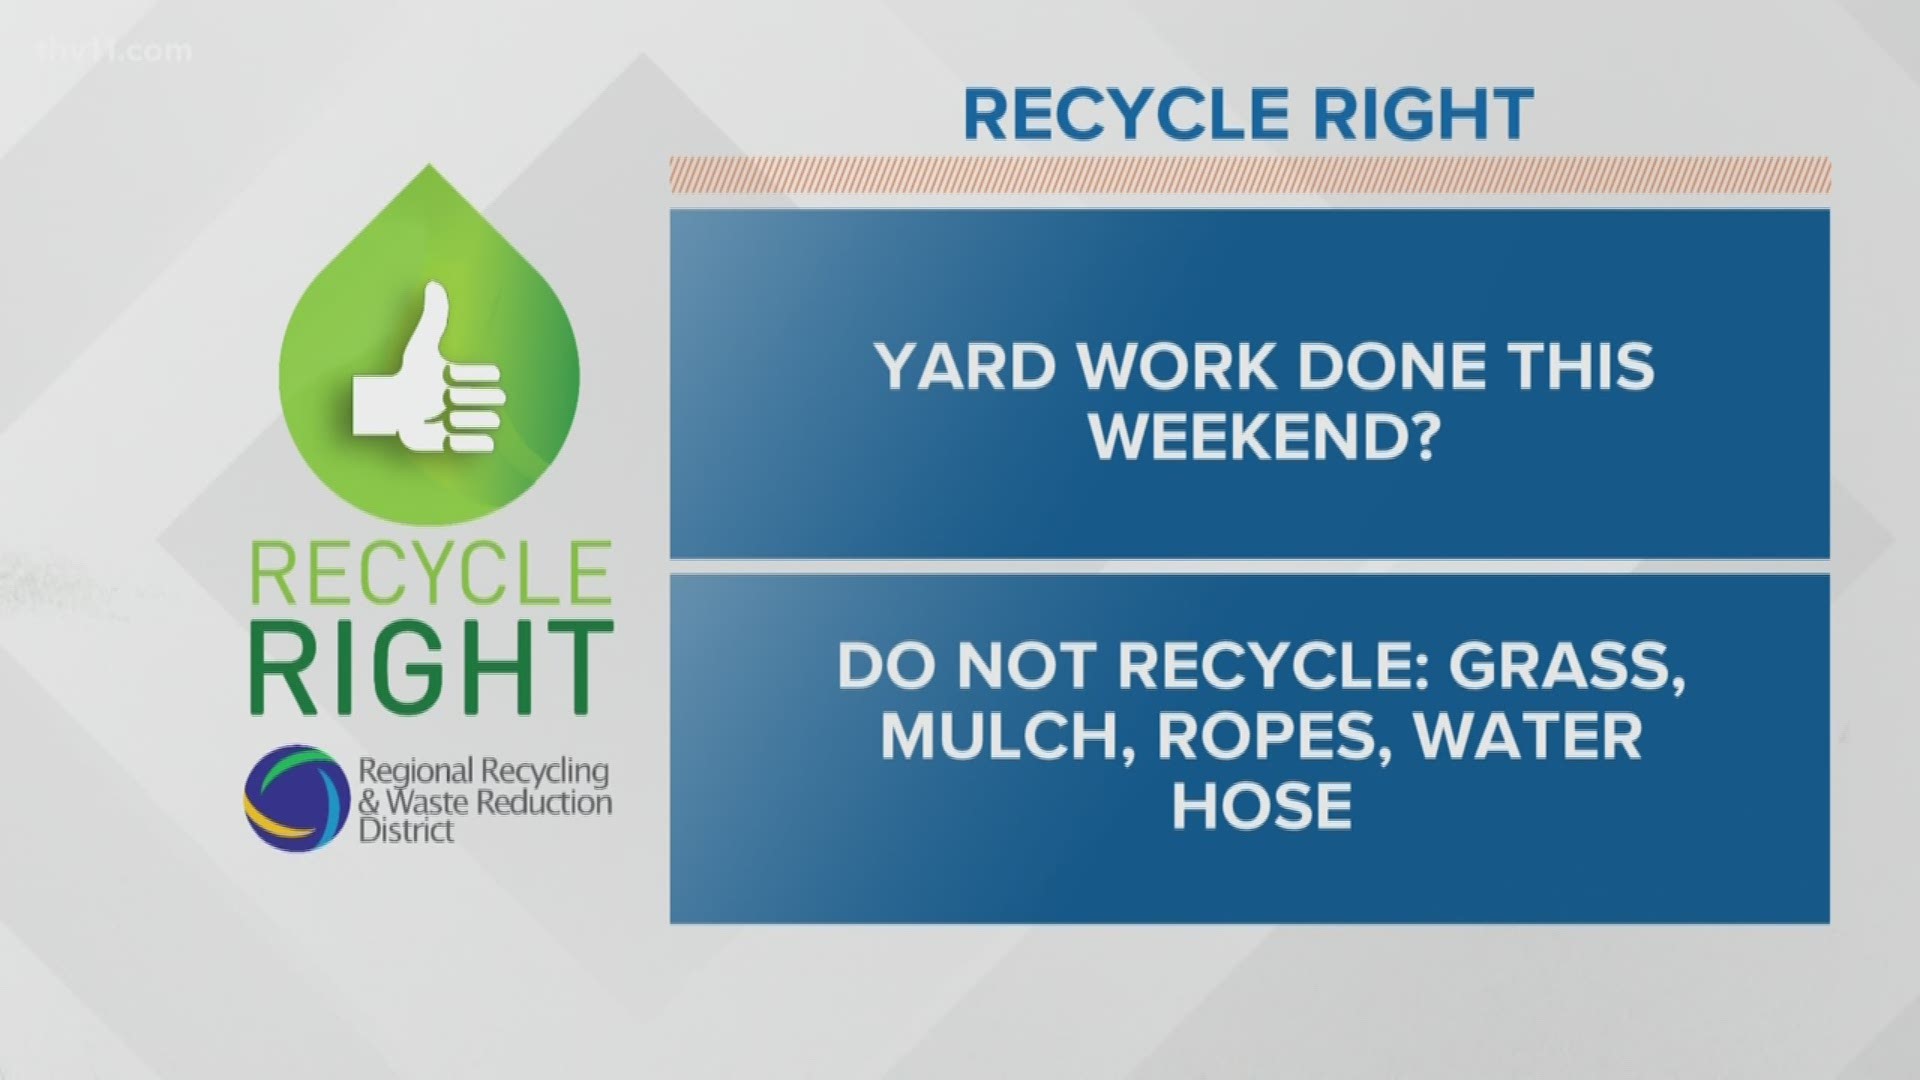 Get that yard work done! But dispose of your waste responsibly!